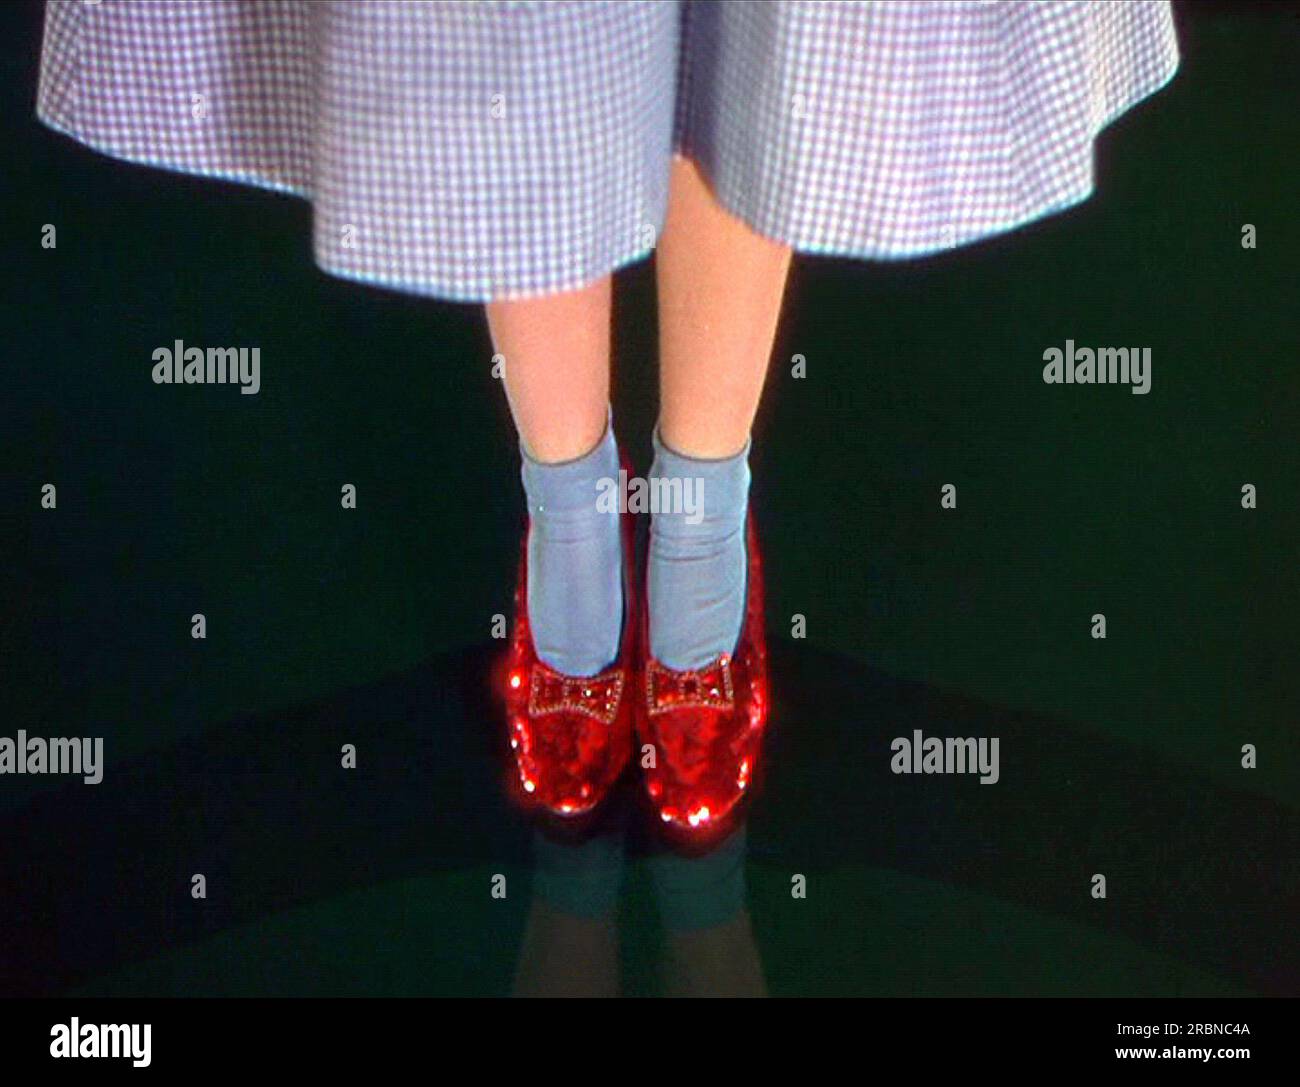 The Wizard Of Oz  Ruby slippers Stock Photo